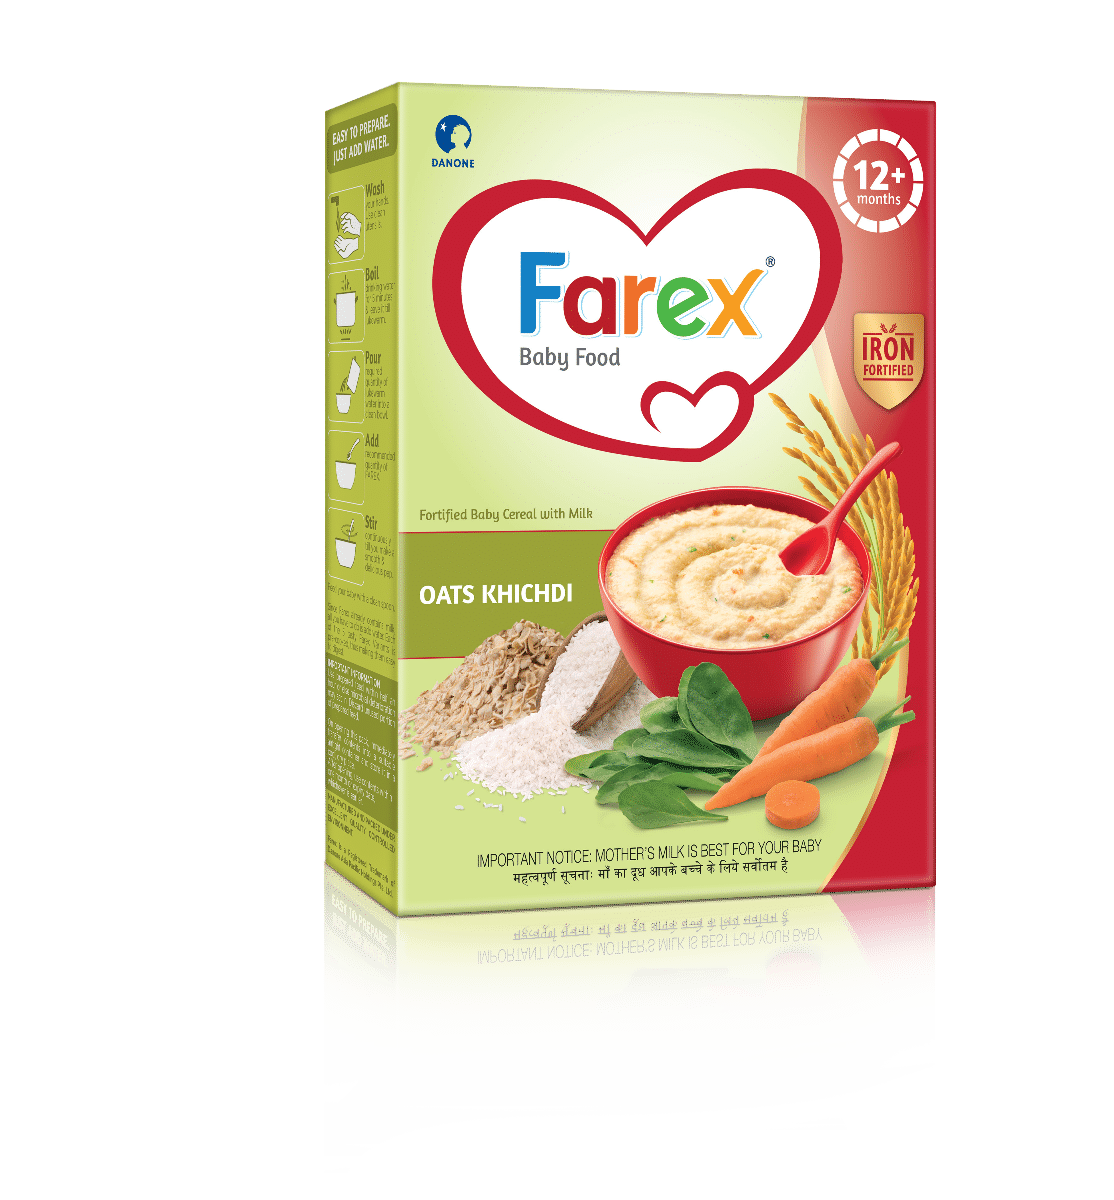 Farex Oats Khichidi Baby Cereal, After 12 Months, 300 gm Refill Pack, Pack of 1 